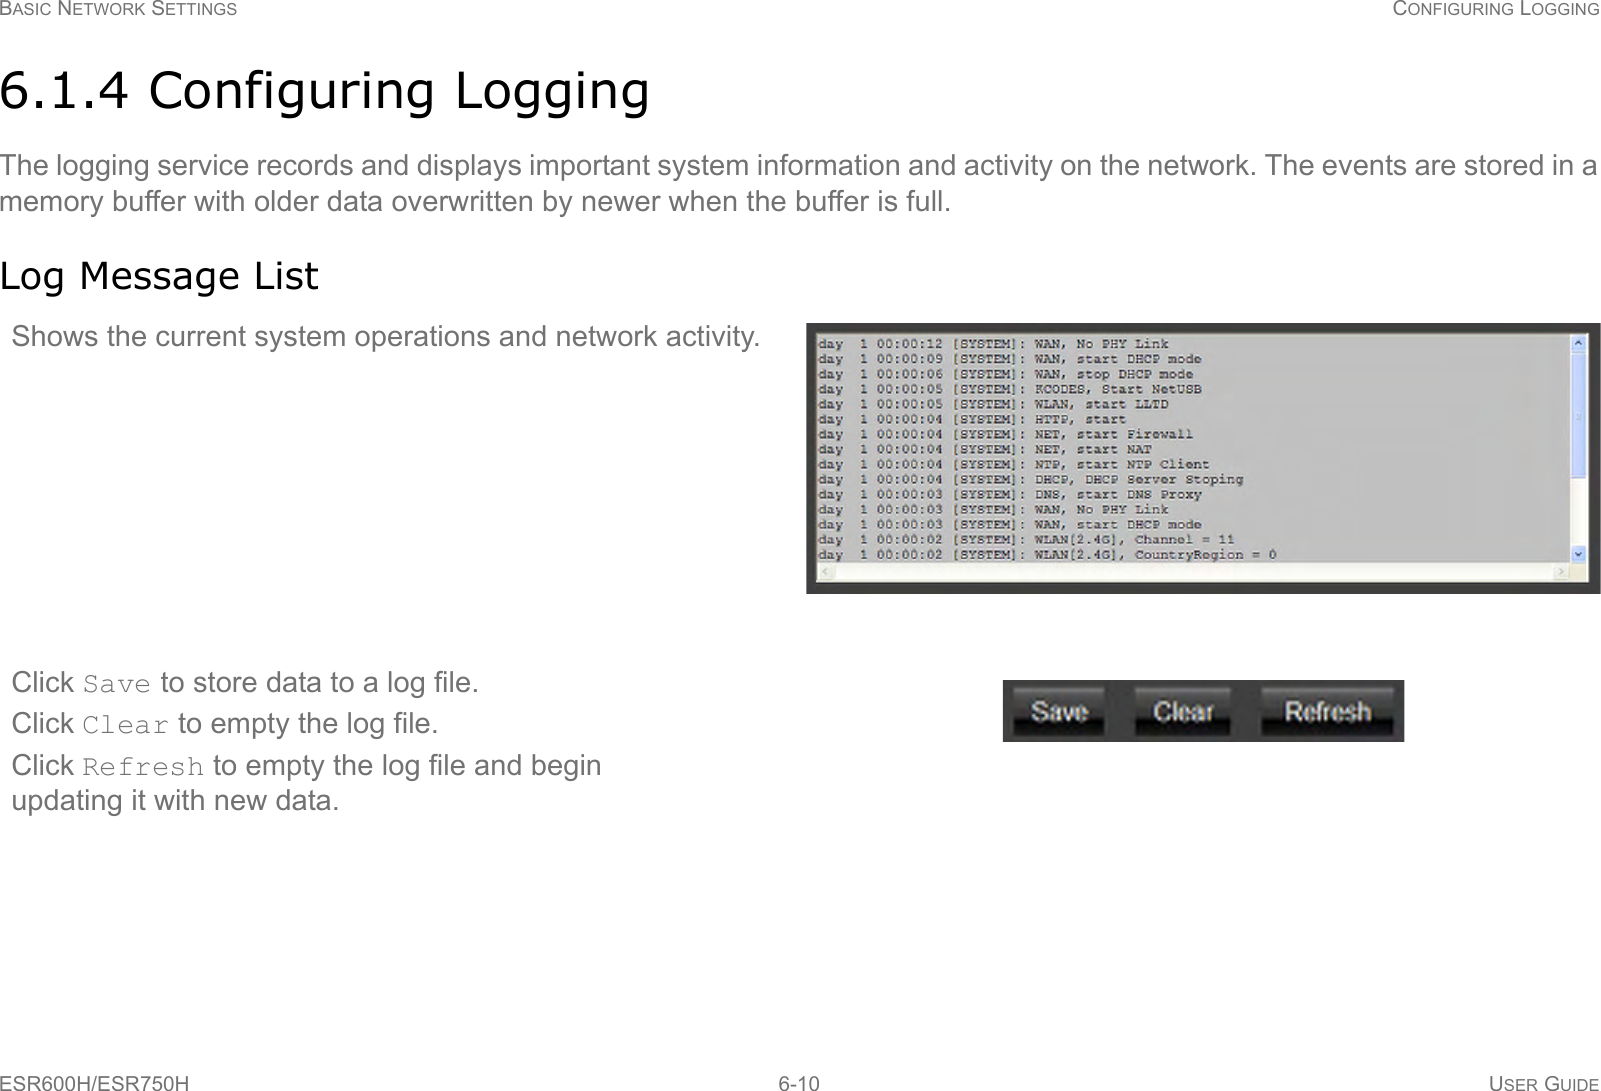 BASIC NETWORK SETTINGS CONFIGURING LOGGINGESR600H/ESR750H 6-10 USER GUIDE6.1.4 Configuring LoggingThe logging service records and displays important system information and activity on the network. The events are stored in a memory buffer with older data overwritten by newer when the buffer is full.Log Message ListShows the current system operations and network activity.Click Save to store data to a log file.Click Clear to empty the log file. Click Refresh to empty the log file and begin updating it with new data.